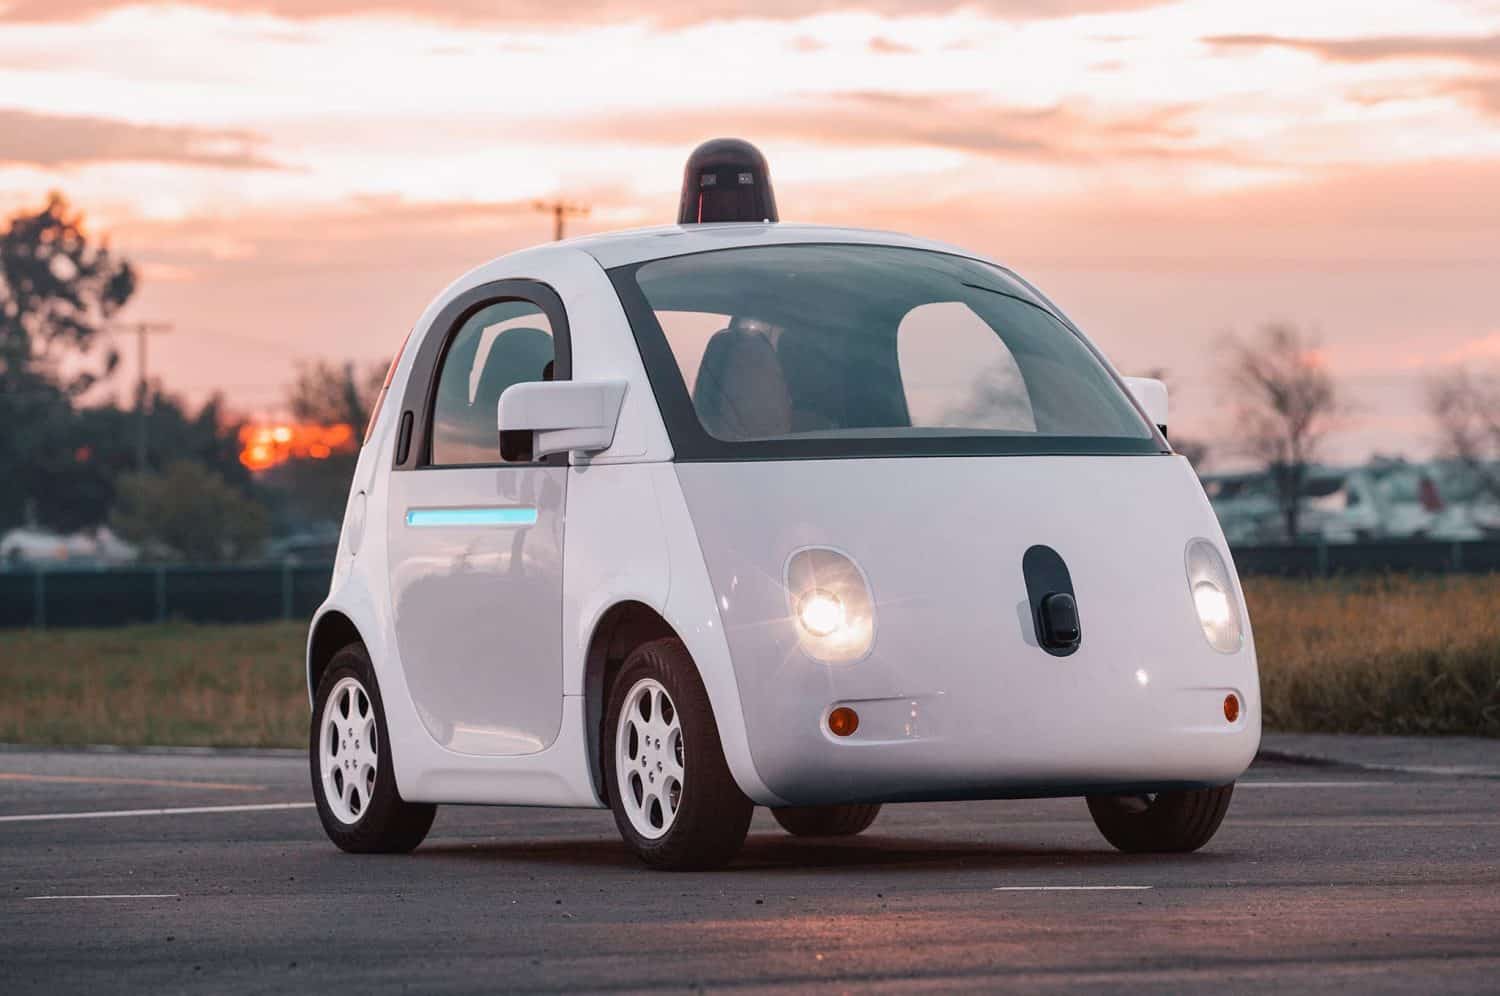 Self-driving cars: Are we ready?